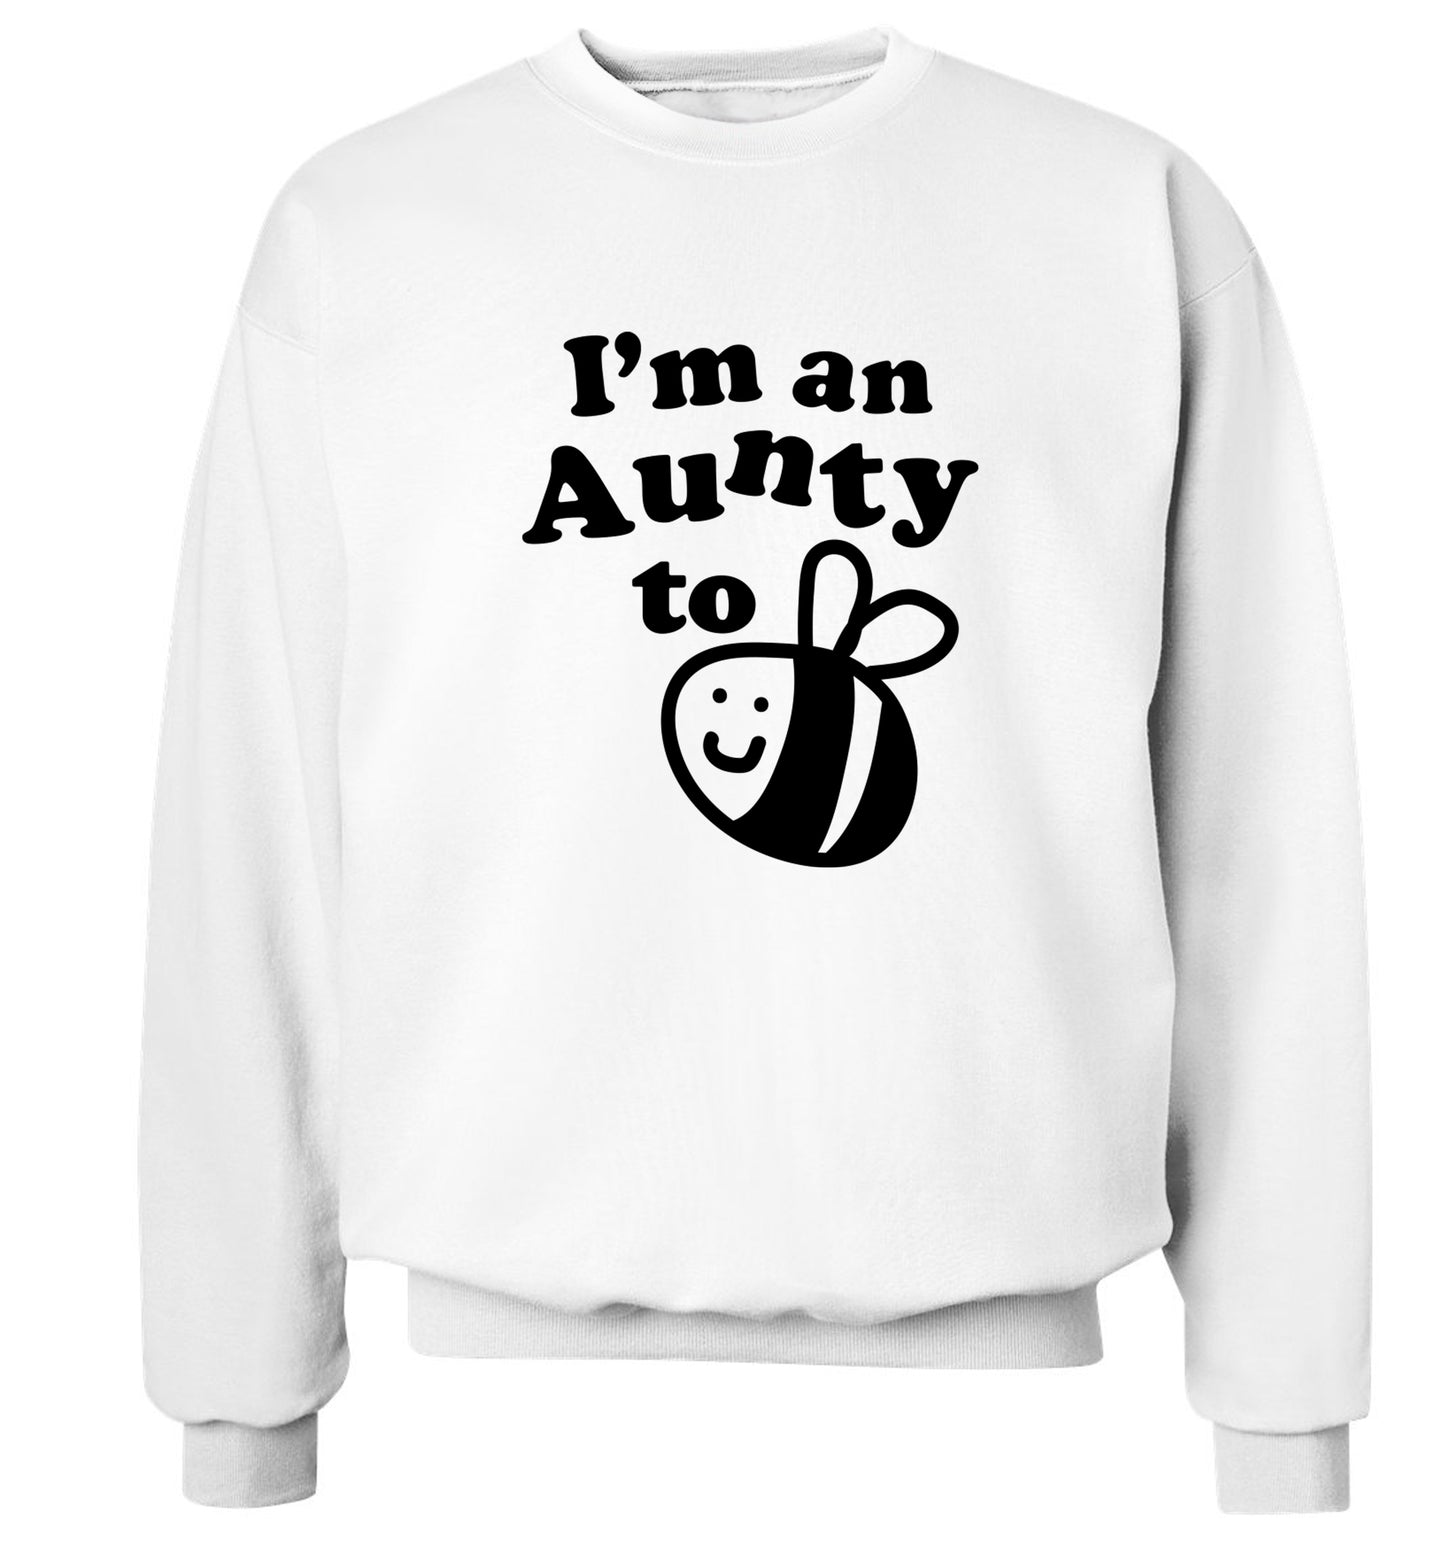 I'm an aunty to be Adult's unisex white Sweater 2XL